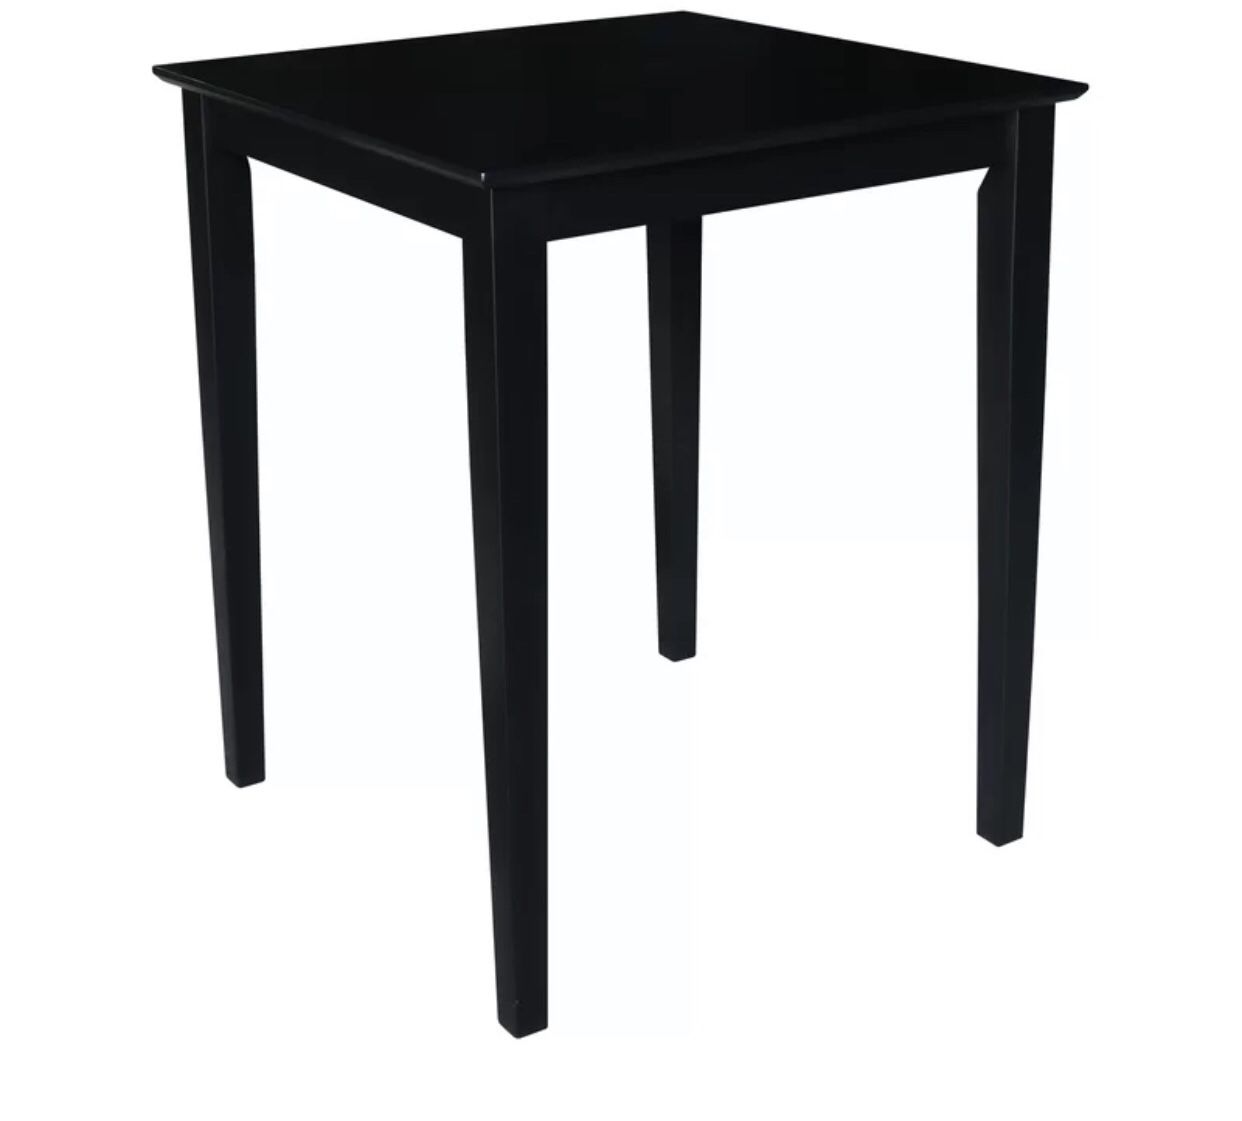 Black Painted Wood Table For Two With Tan Fabric Chairs